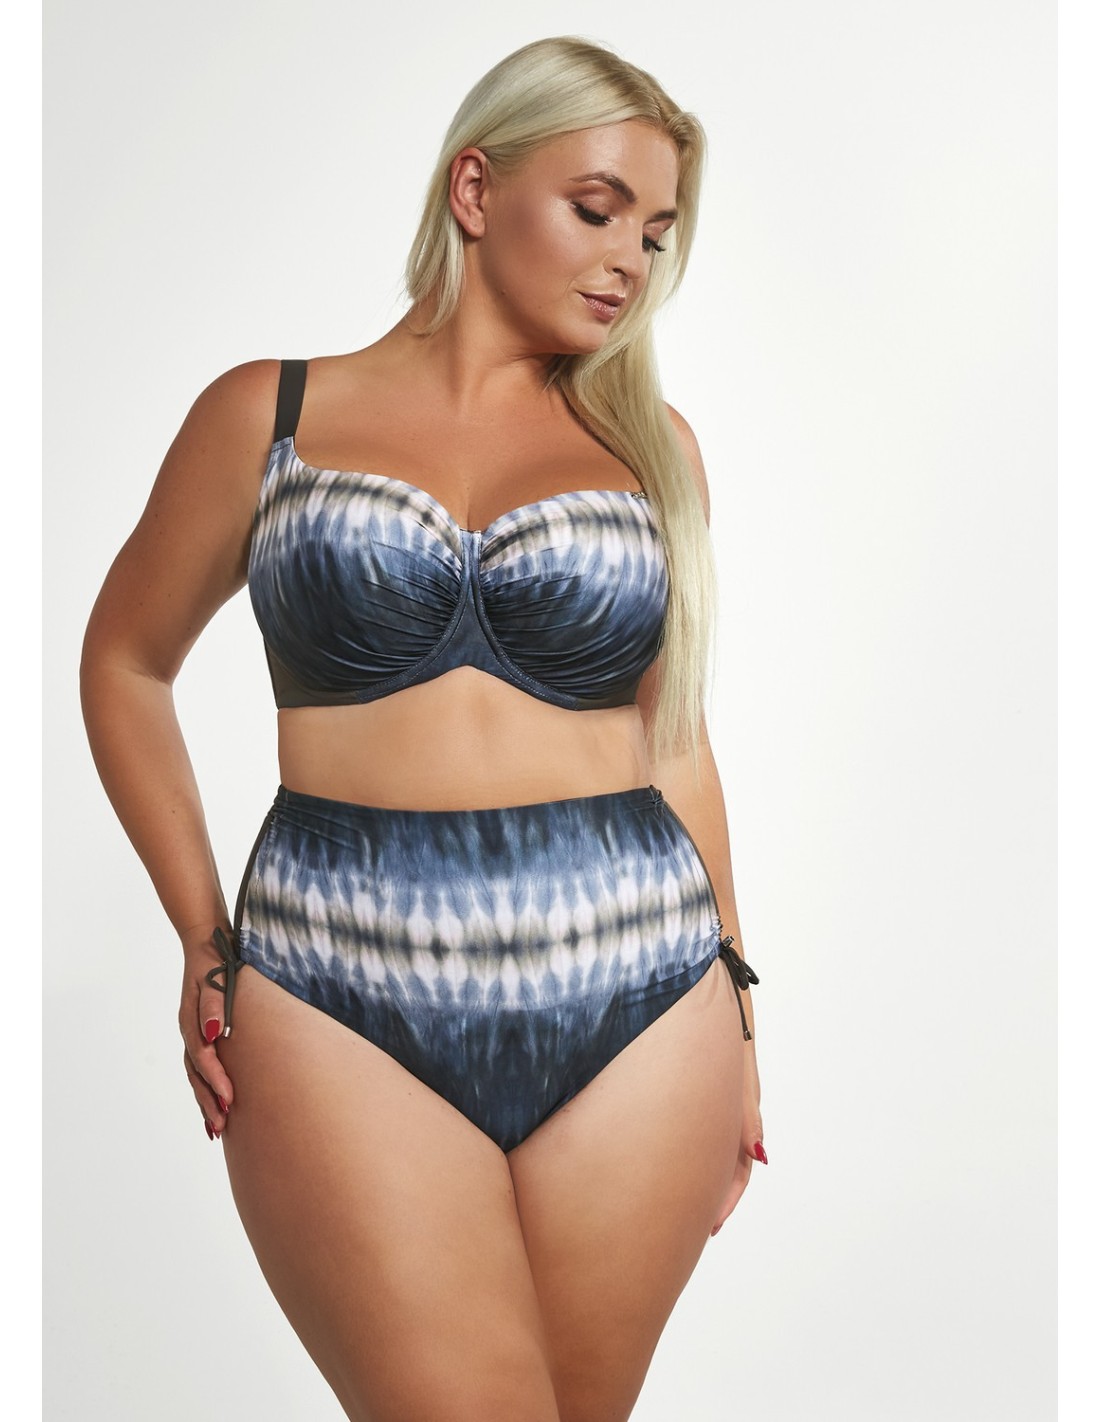 Plus Size Swimsuit Bra with Soft Cups for Big Breasts - KrislinePRADESH